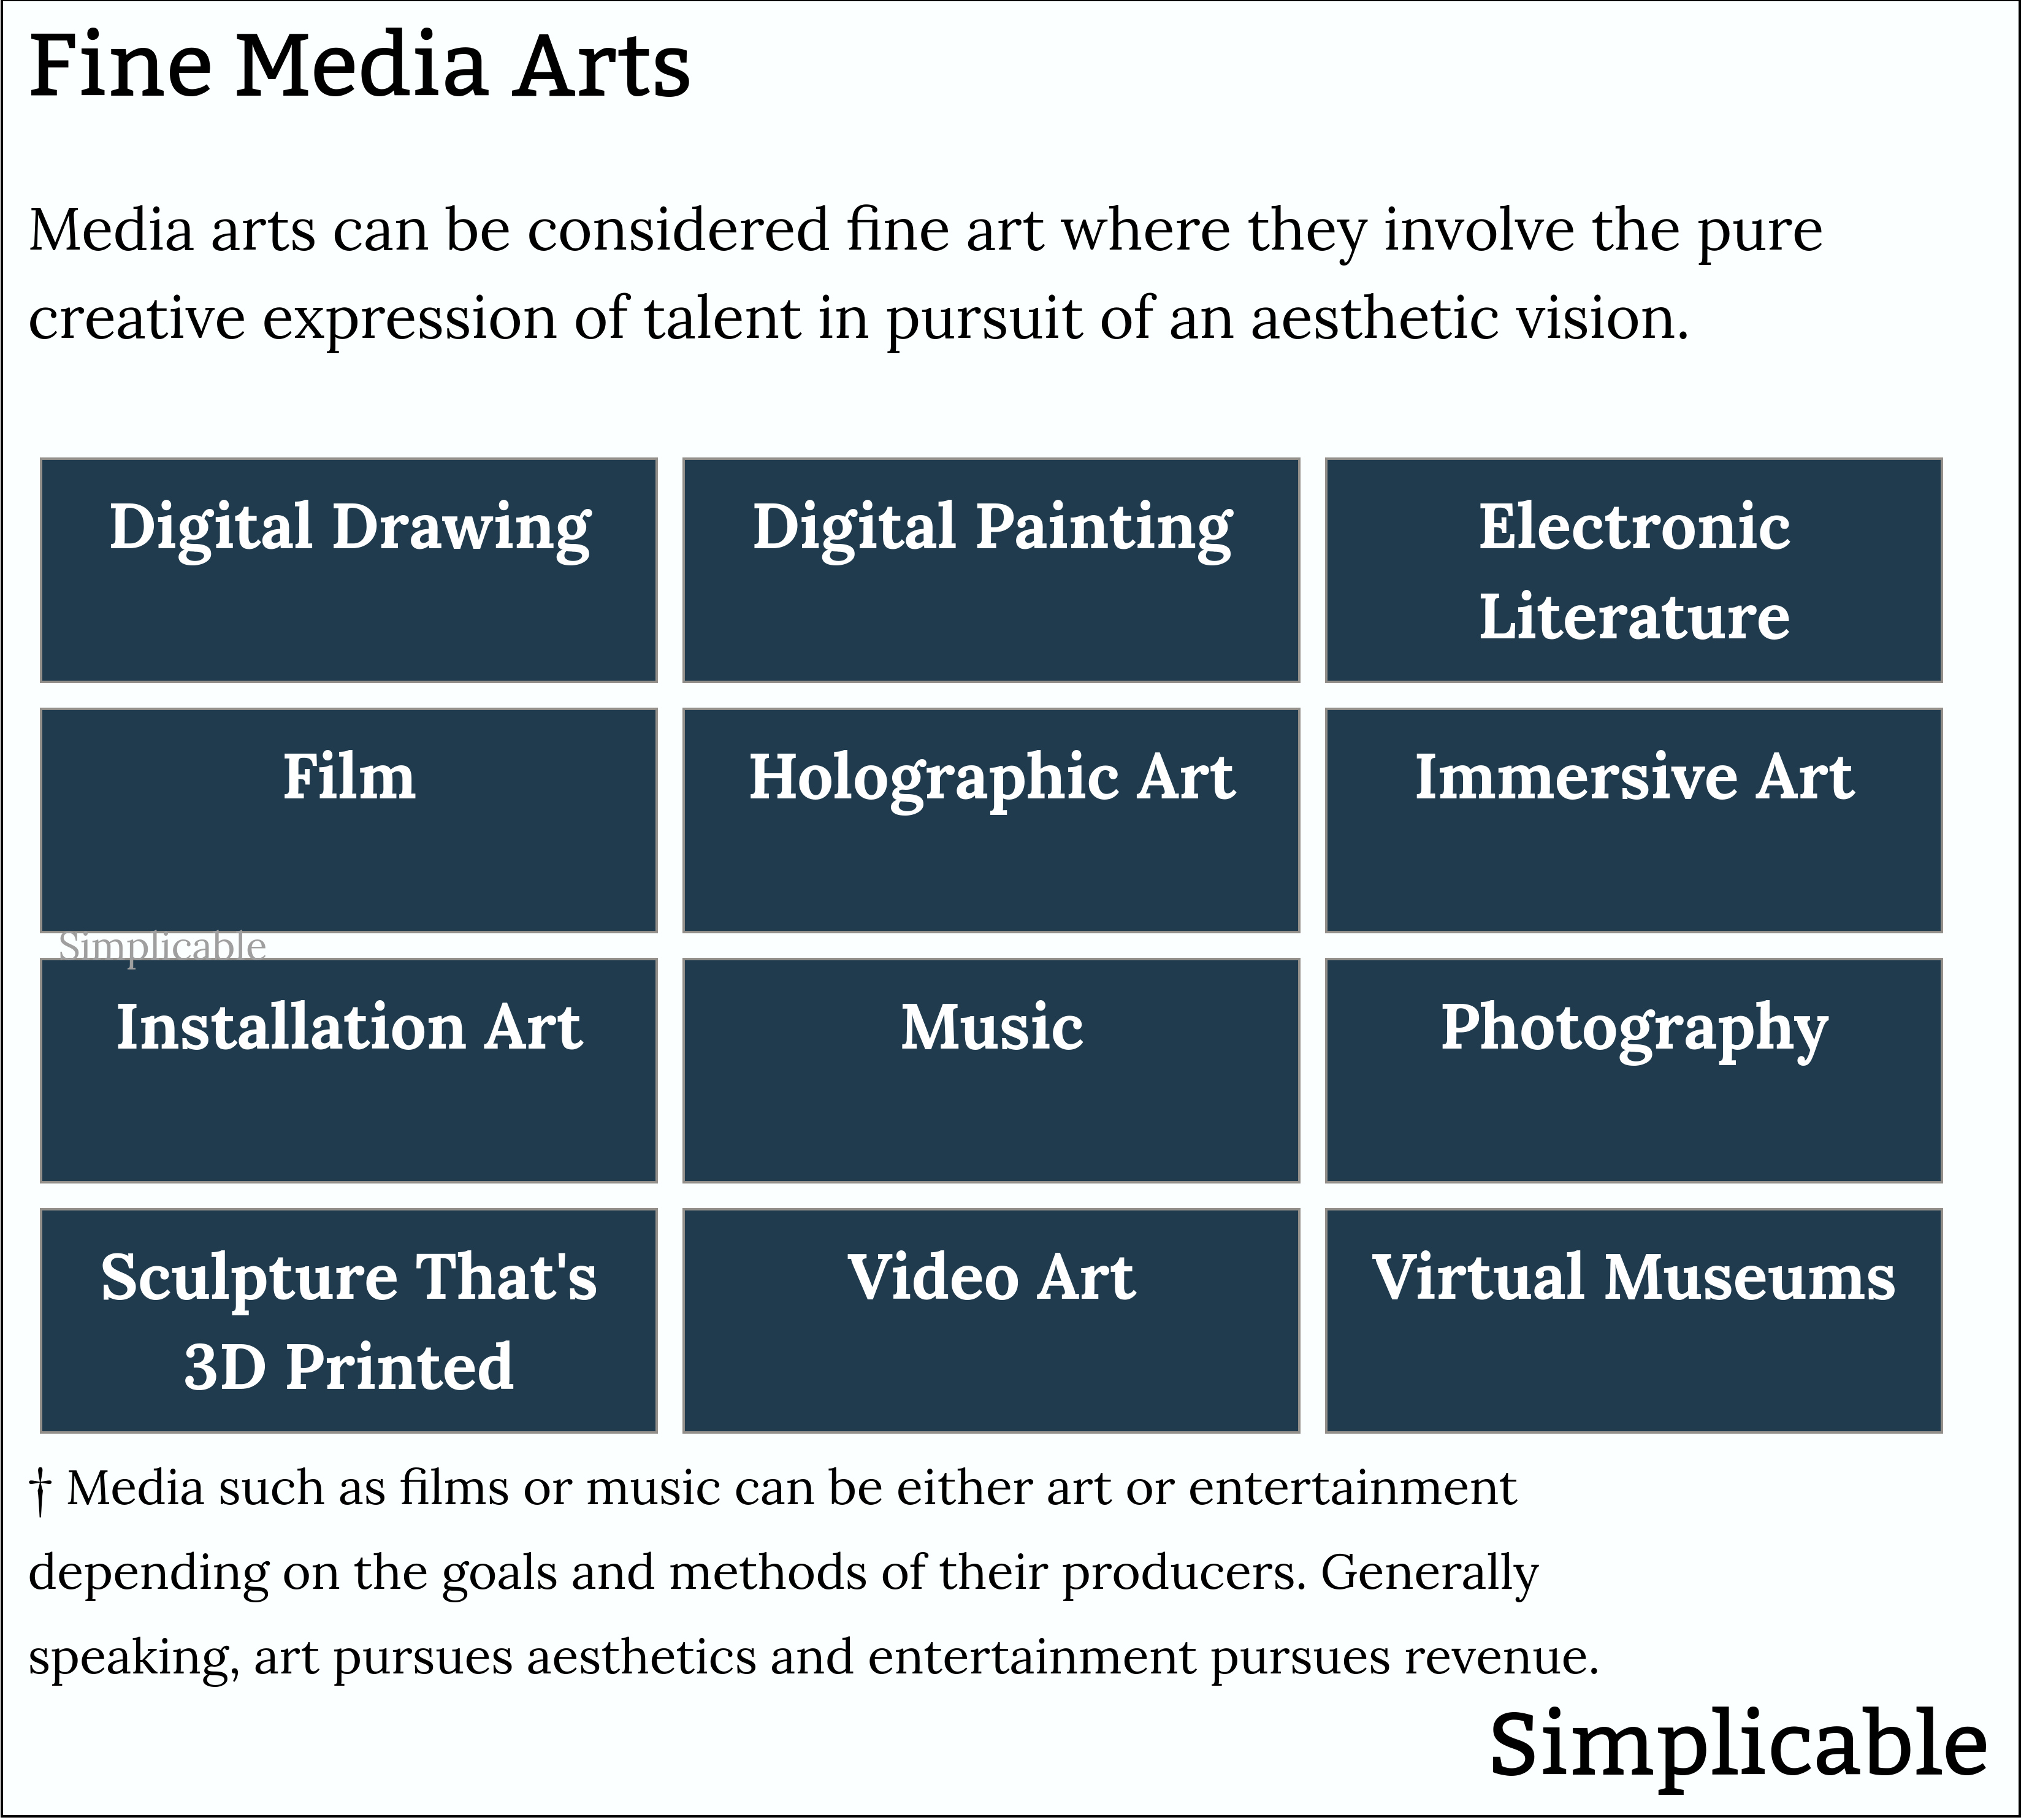 examples of media art that is fine art